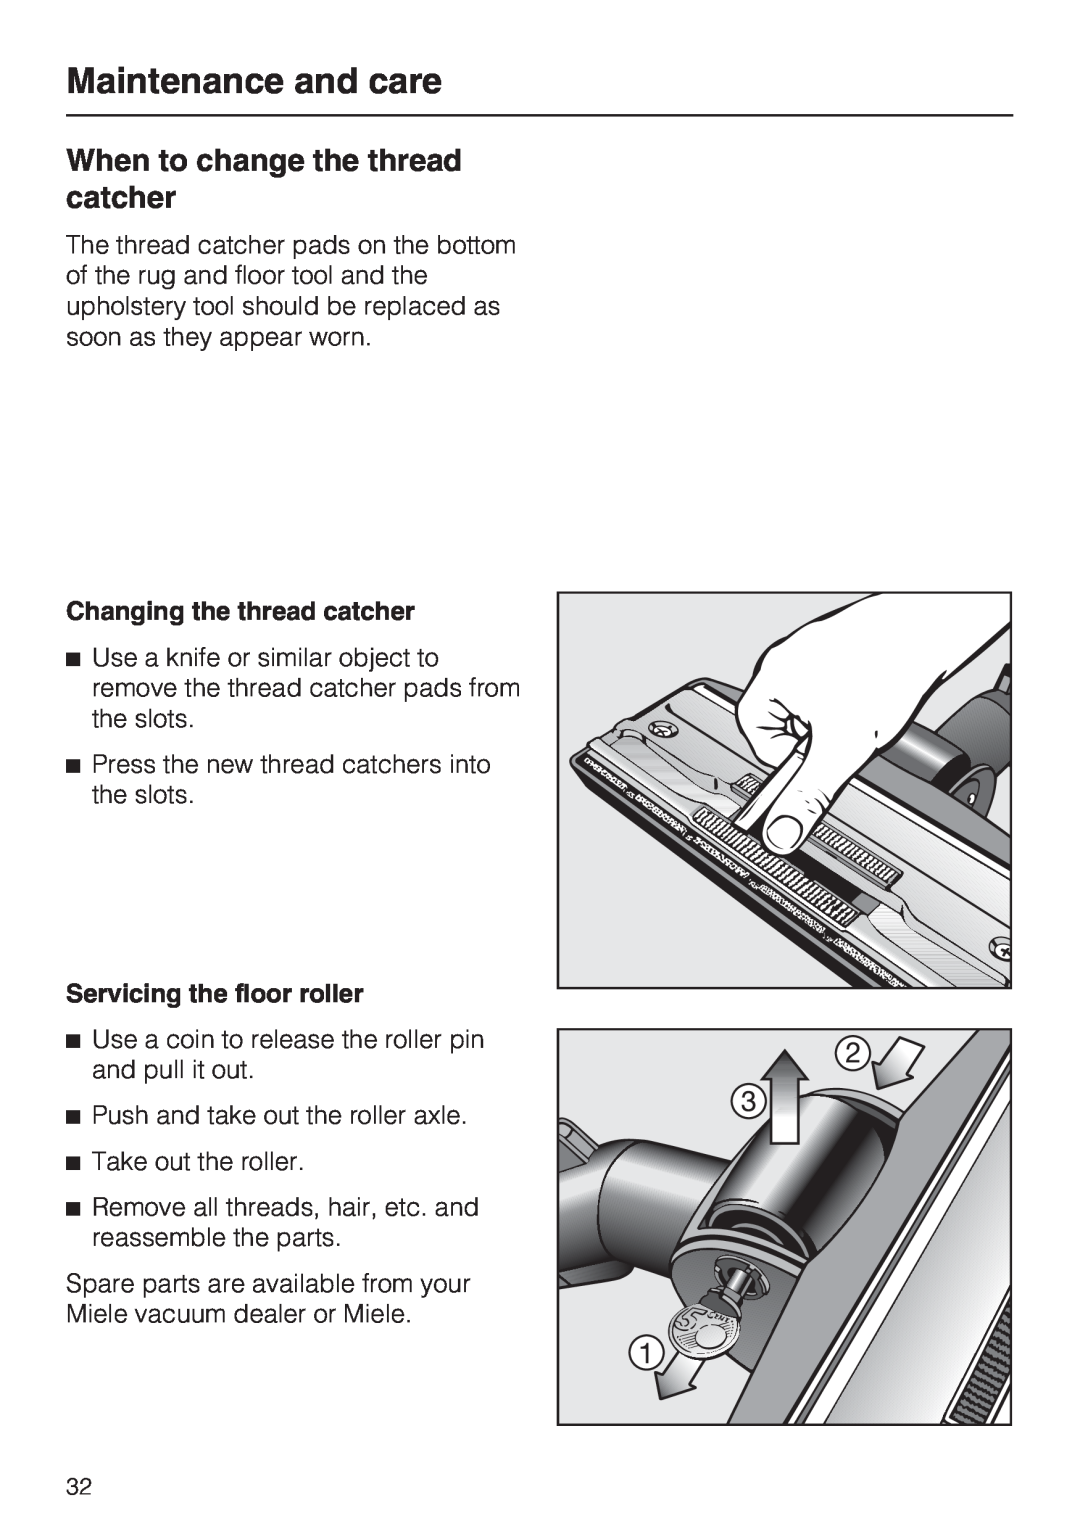 NEC S 5000 operating instructions When to change the thread catcher, Maintenance and care, Changing the thread catcher 